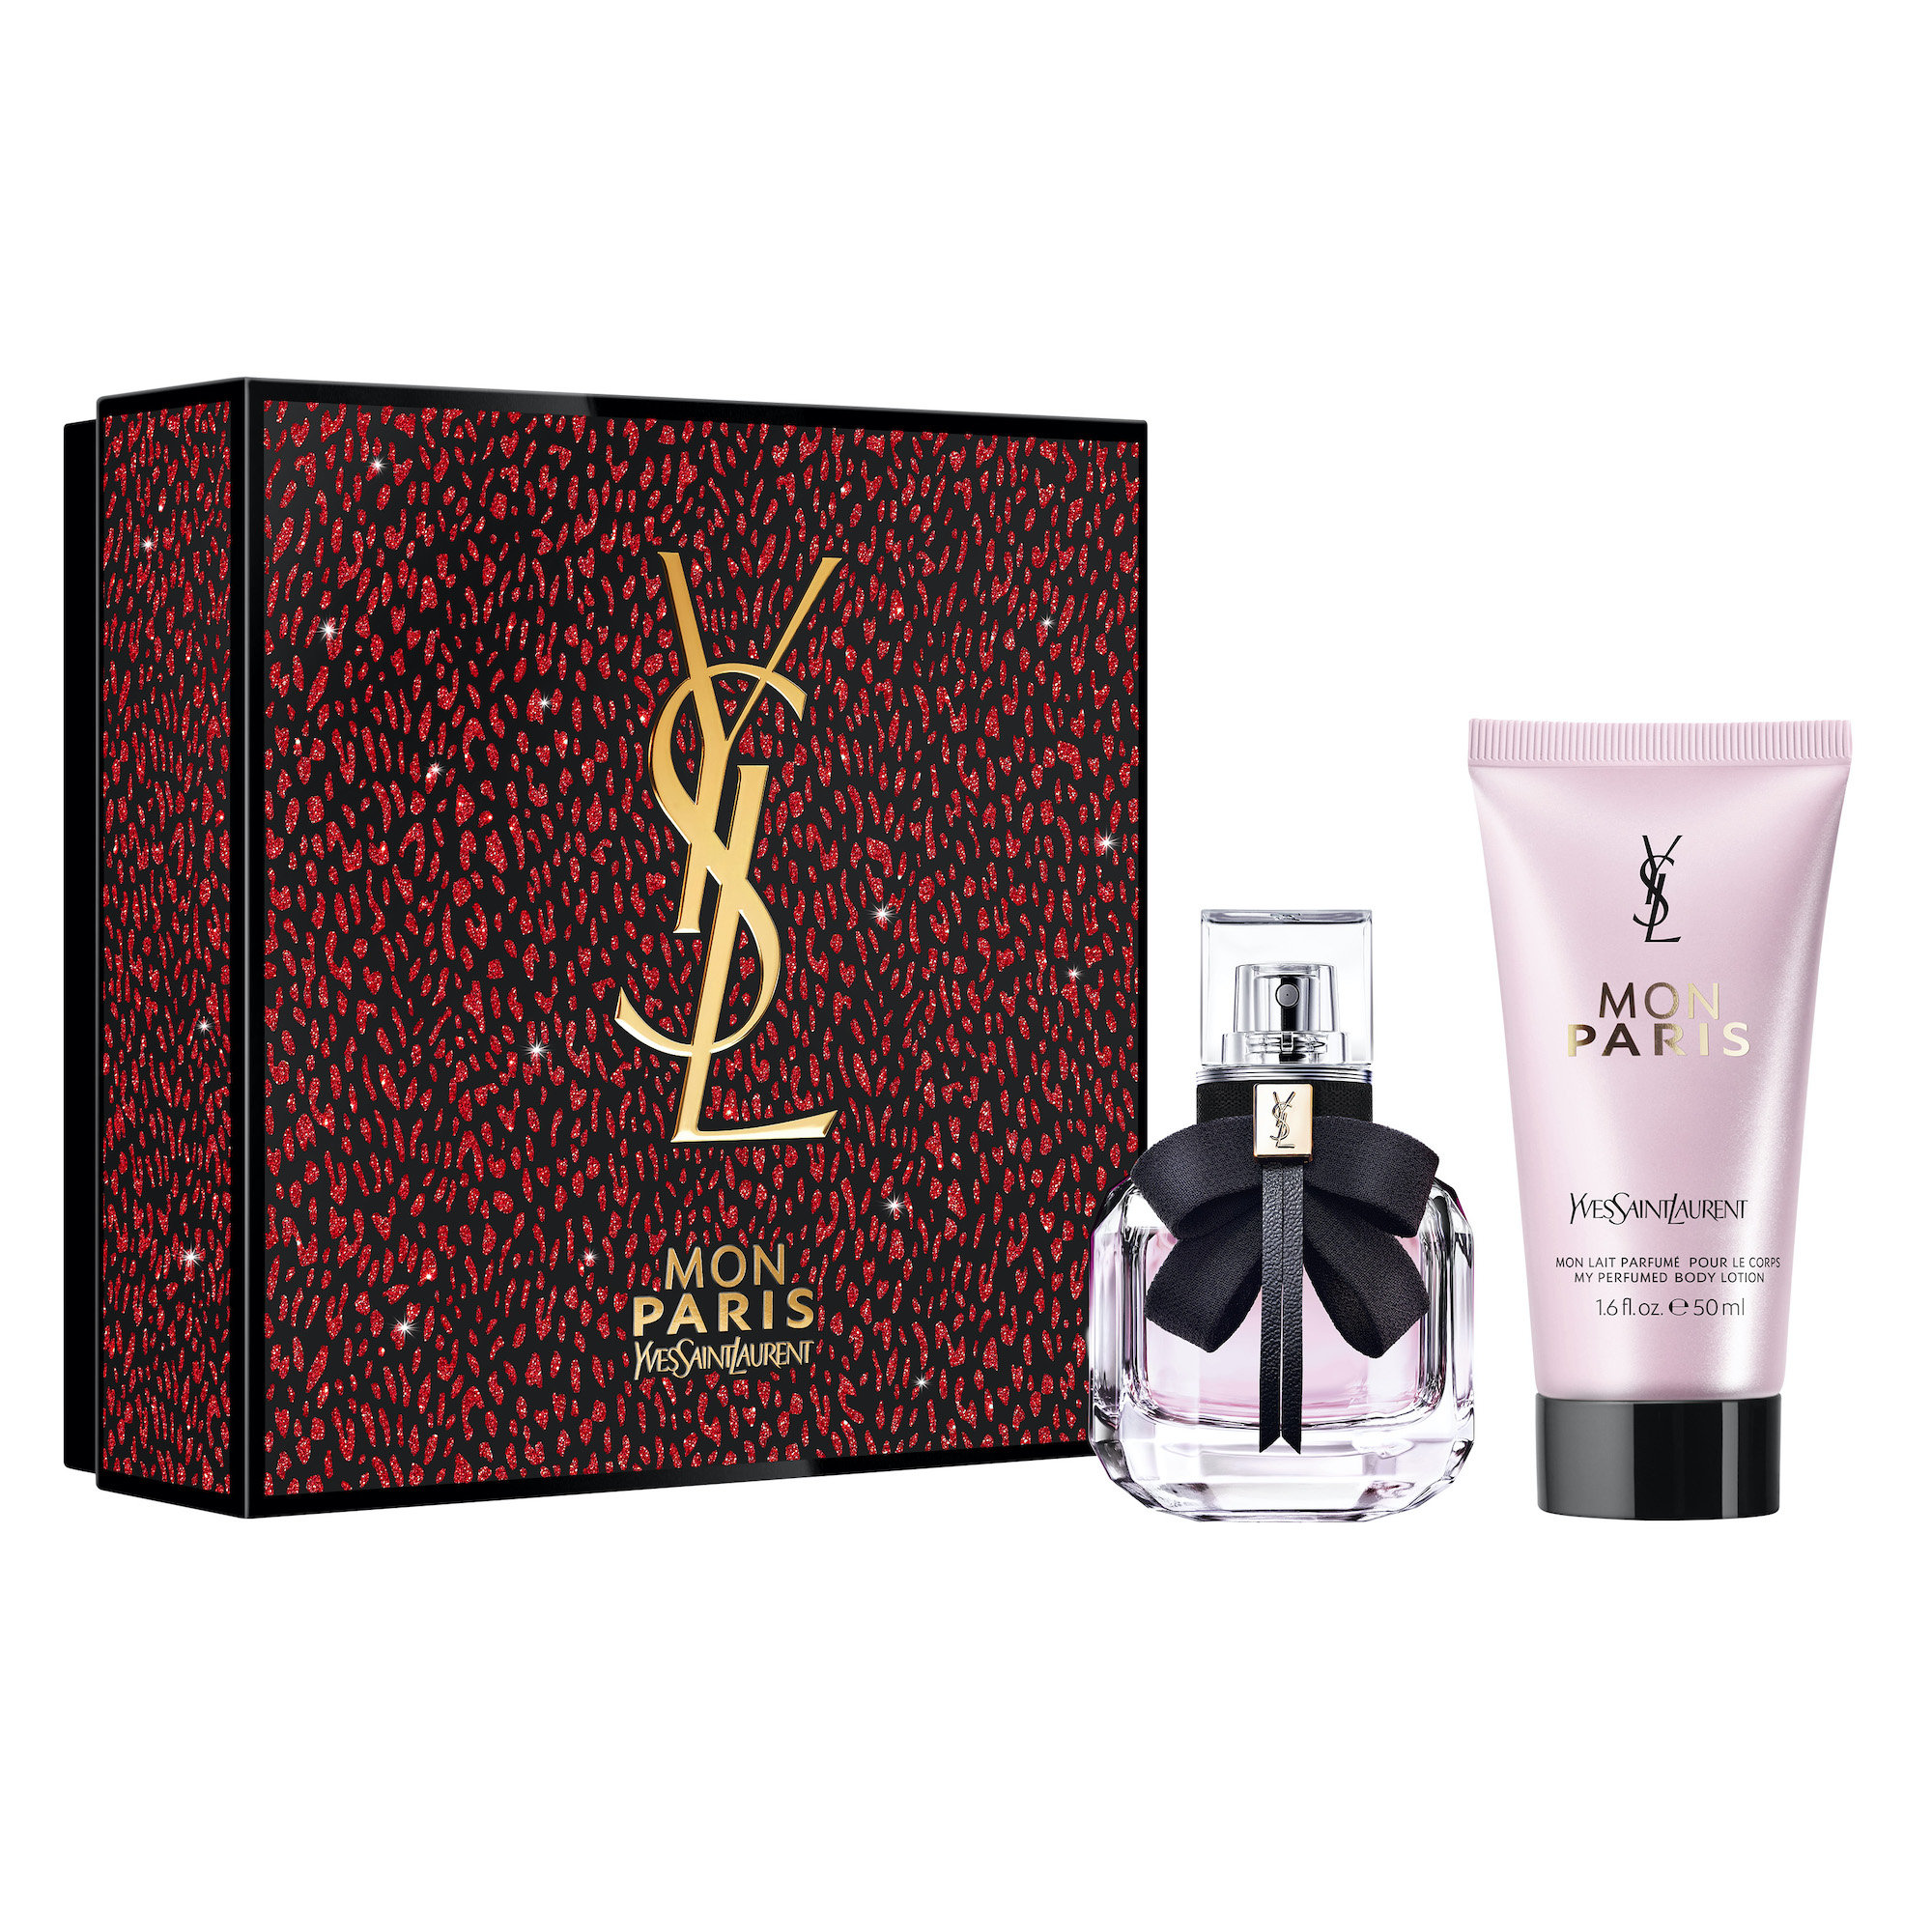 YSL Beauty Features Edgy Leopard Prints All Over Their 2020 Holiday ...